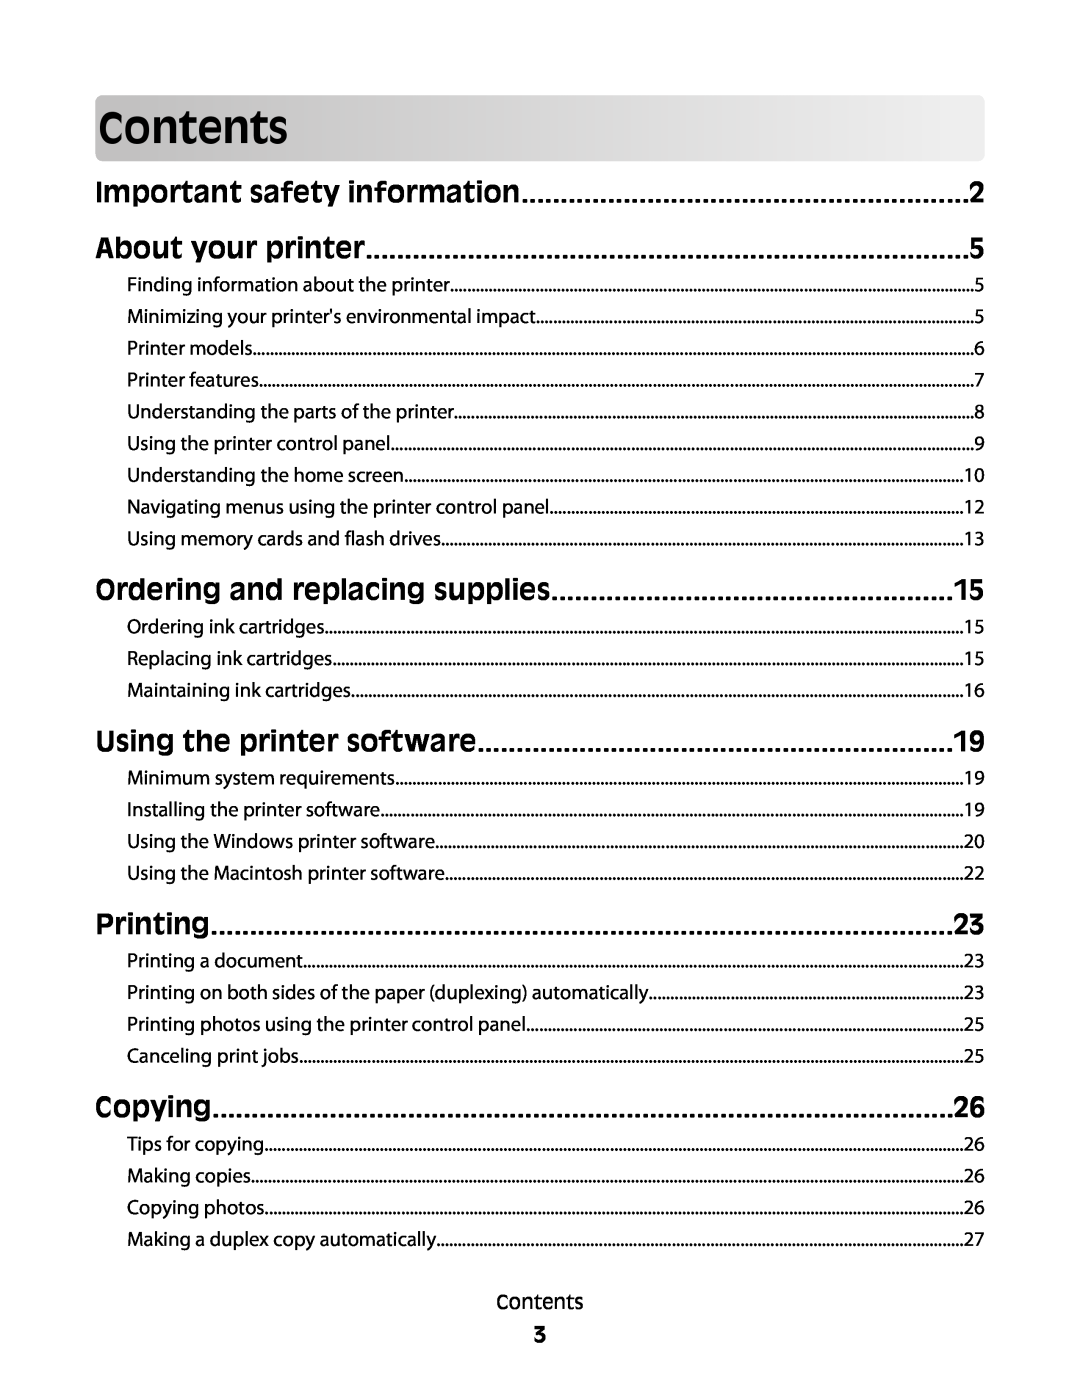 Lexmark S600 manual Contents, Important safety information, About your printer, Ordering and replacing supplies, Printing 